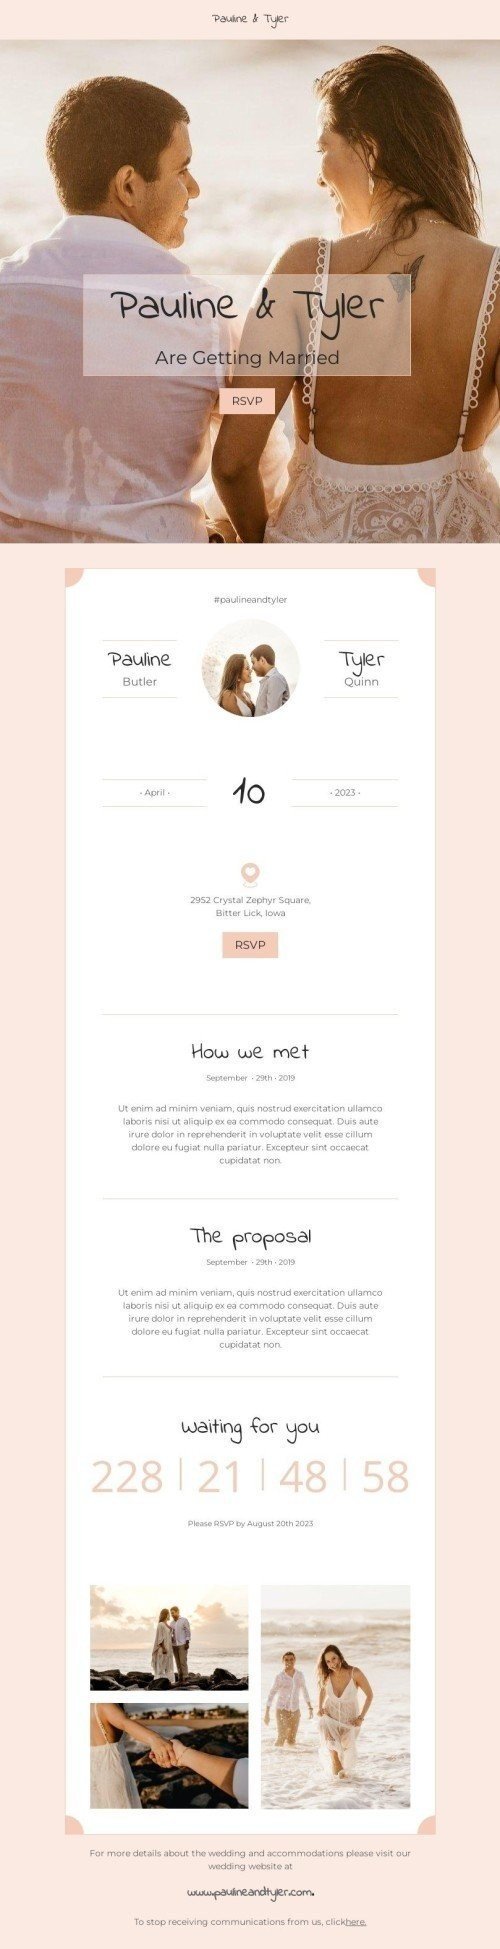 Wedding Invitation Email Template "Pauline and Tyler are getting married" for Hobbies industry desktop view